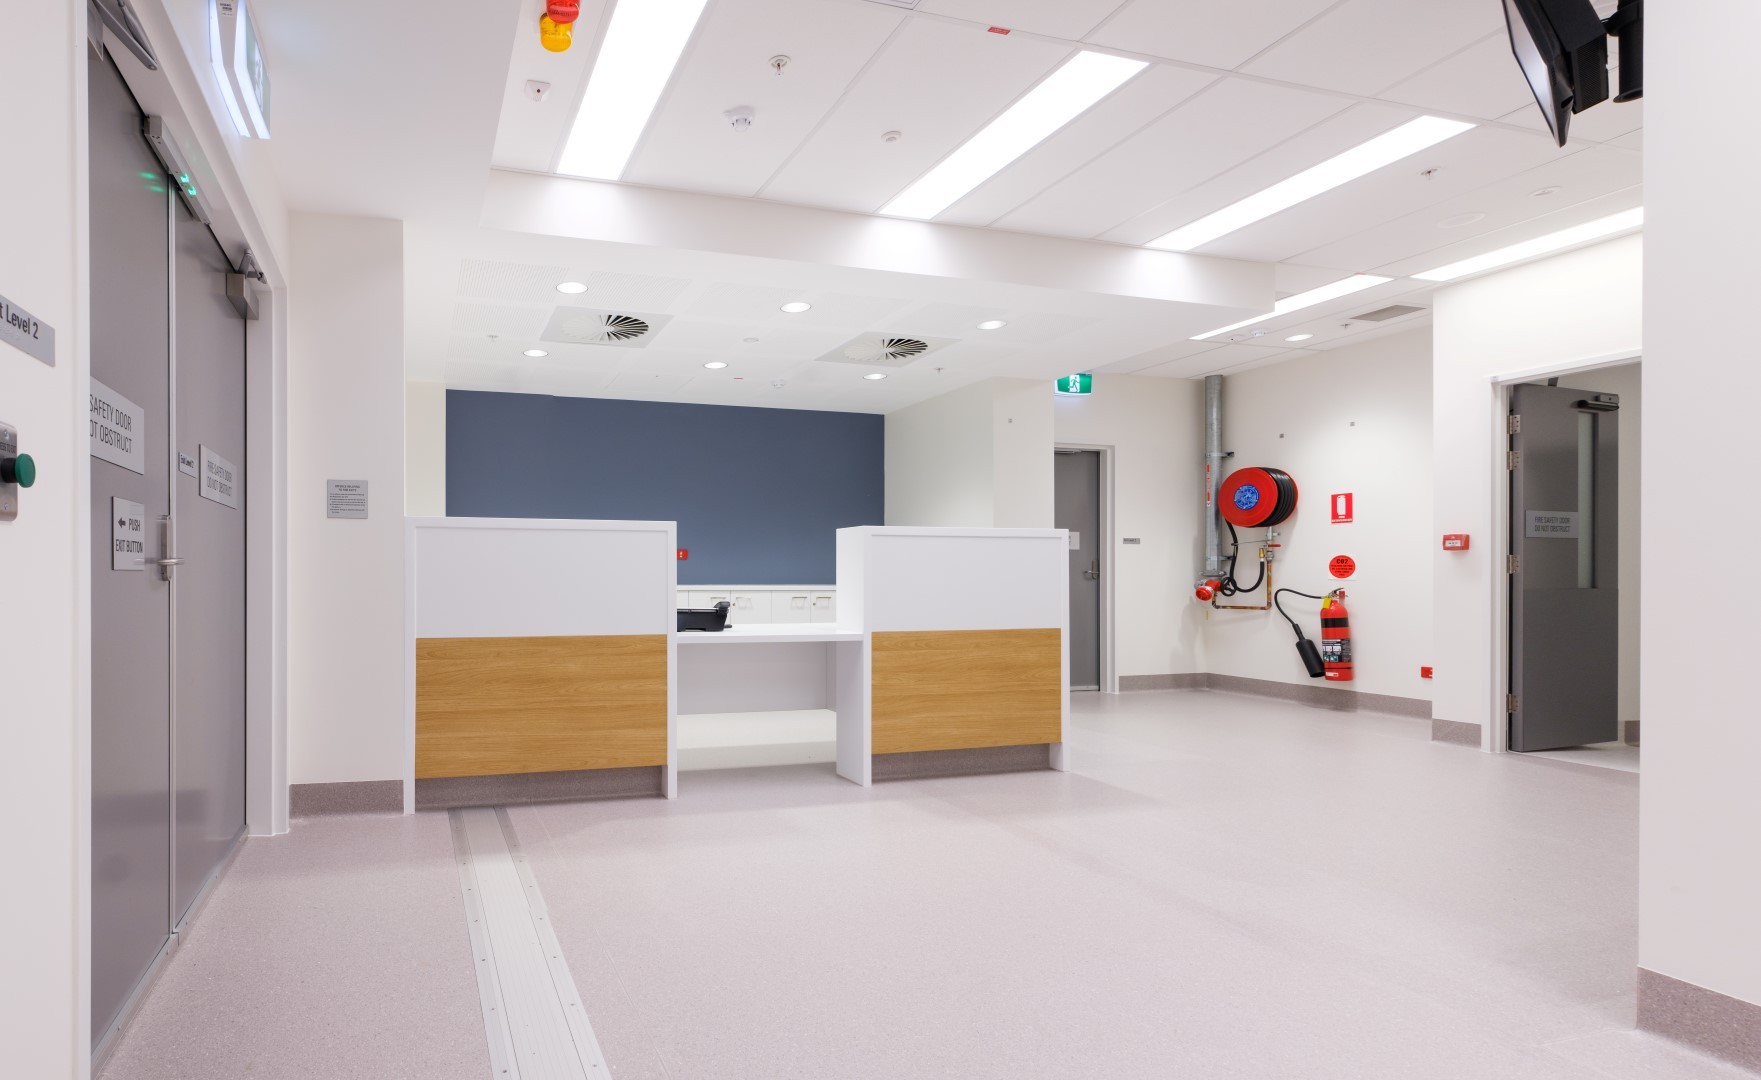 Westmead Hospital Milestone 7 – Audiology and Ears, Nose and Throat (ENT) Clinic